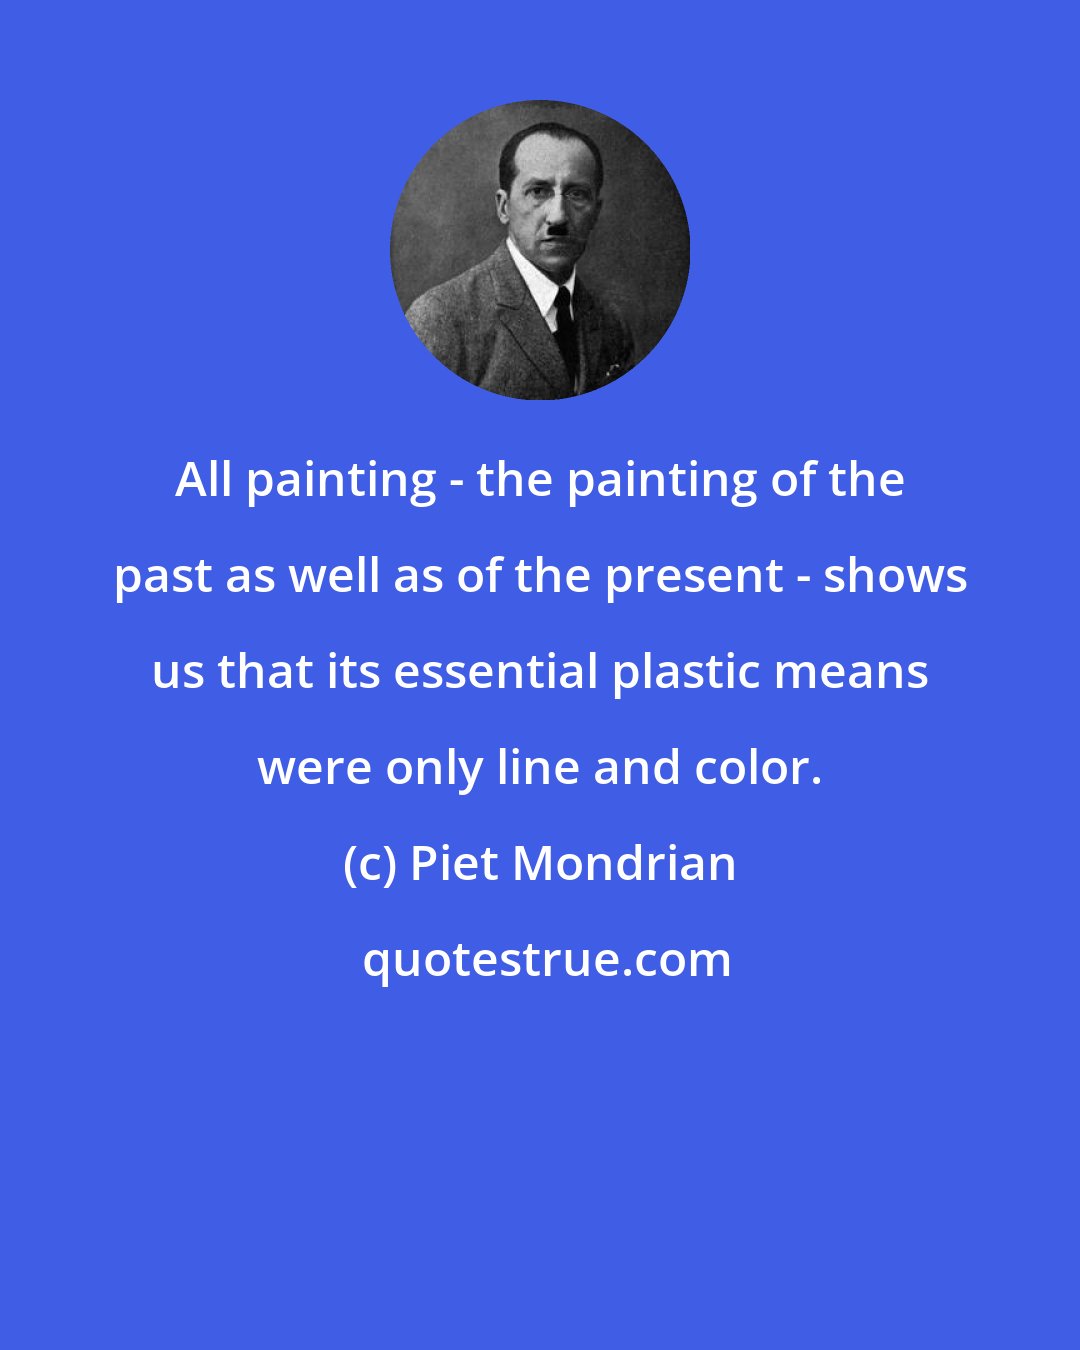 Piet Mondrian: All painting - the painting of the past as well as of the present - shows us that its essential plastic means were only line and color.